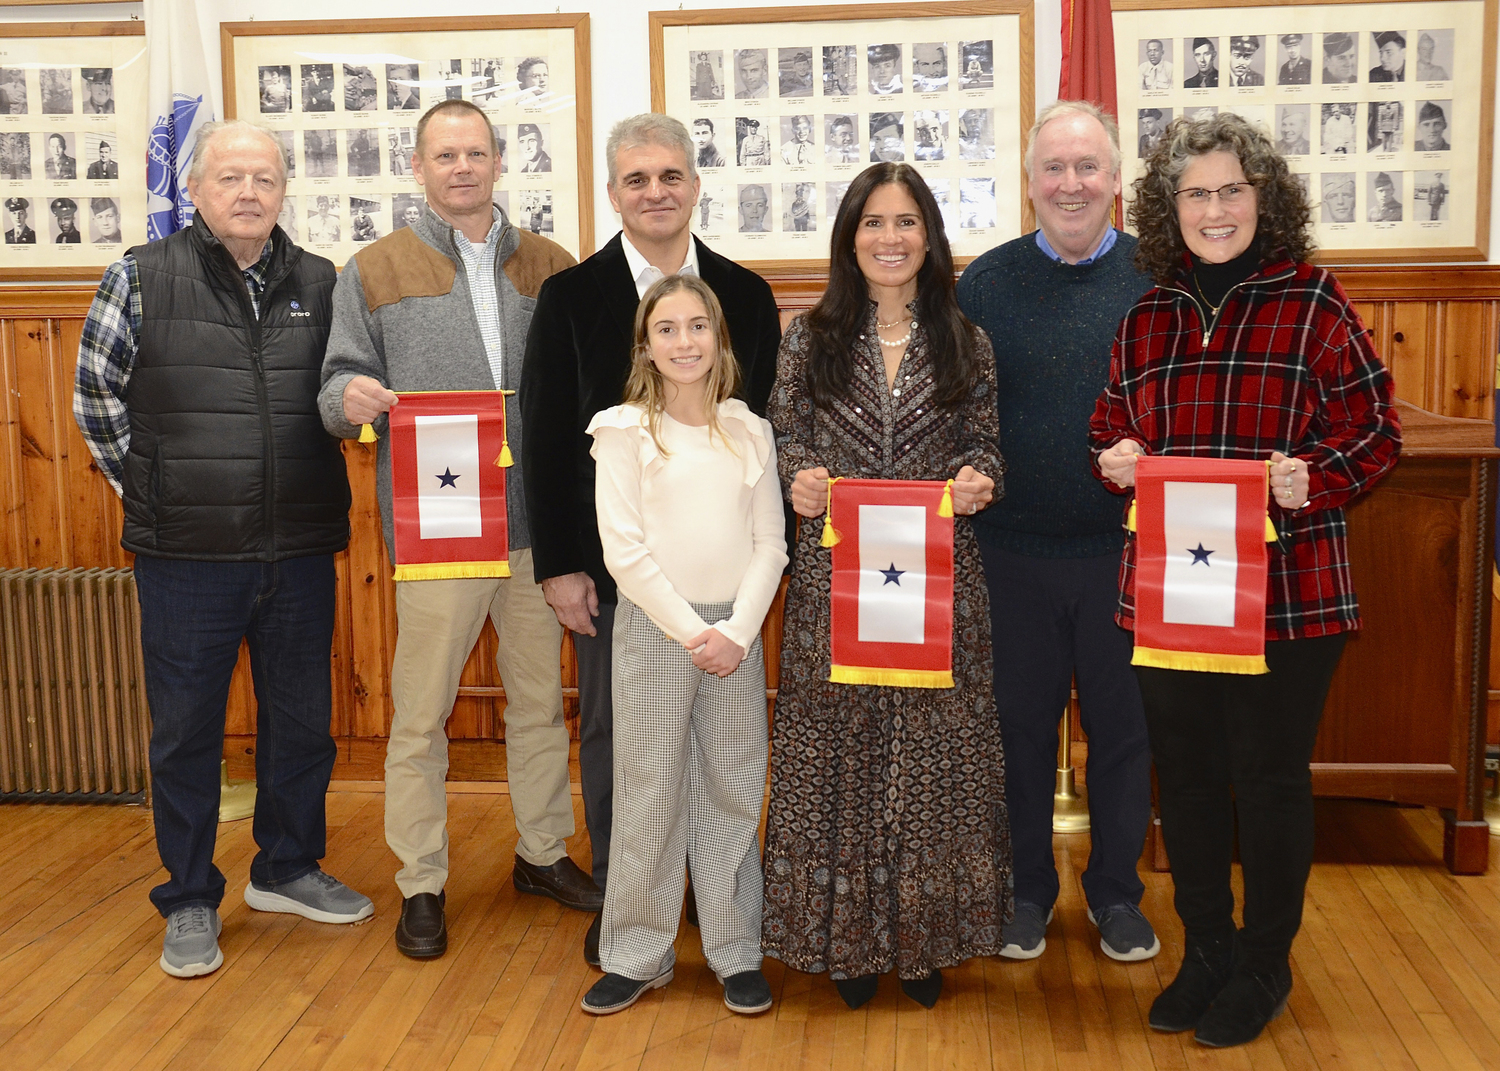 VFW Post 9082 in Sag Harbor recently recognized the Burns family, the Mavellia family and the Gilbride family at a Blue Star Banner Presentation for the families of active duty members serving in the military.  Family members serving in the military are, Arlena Faith Burns, 1LT Army  Mitchell Mavellia, USMC and Gavin Gilbride, USAF.    KYRIL BROMLEY